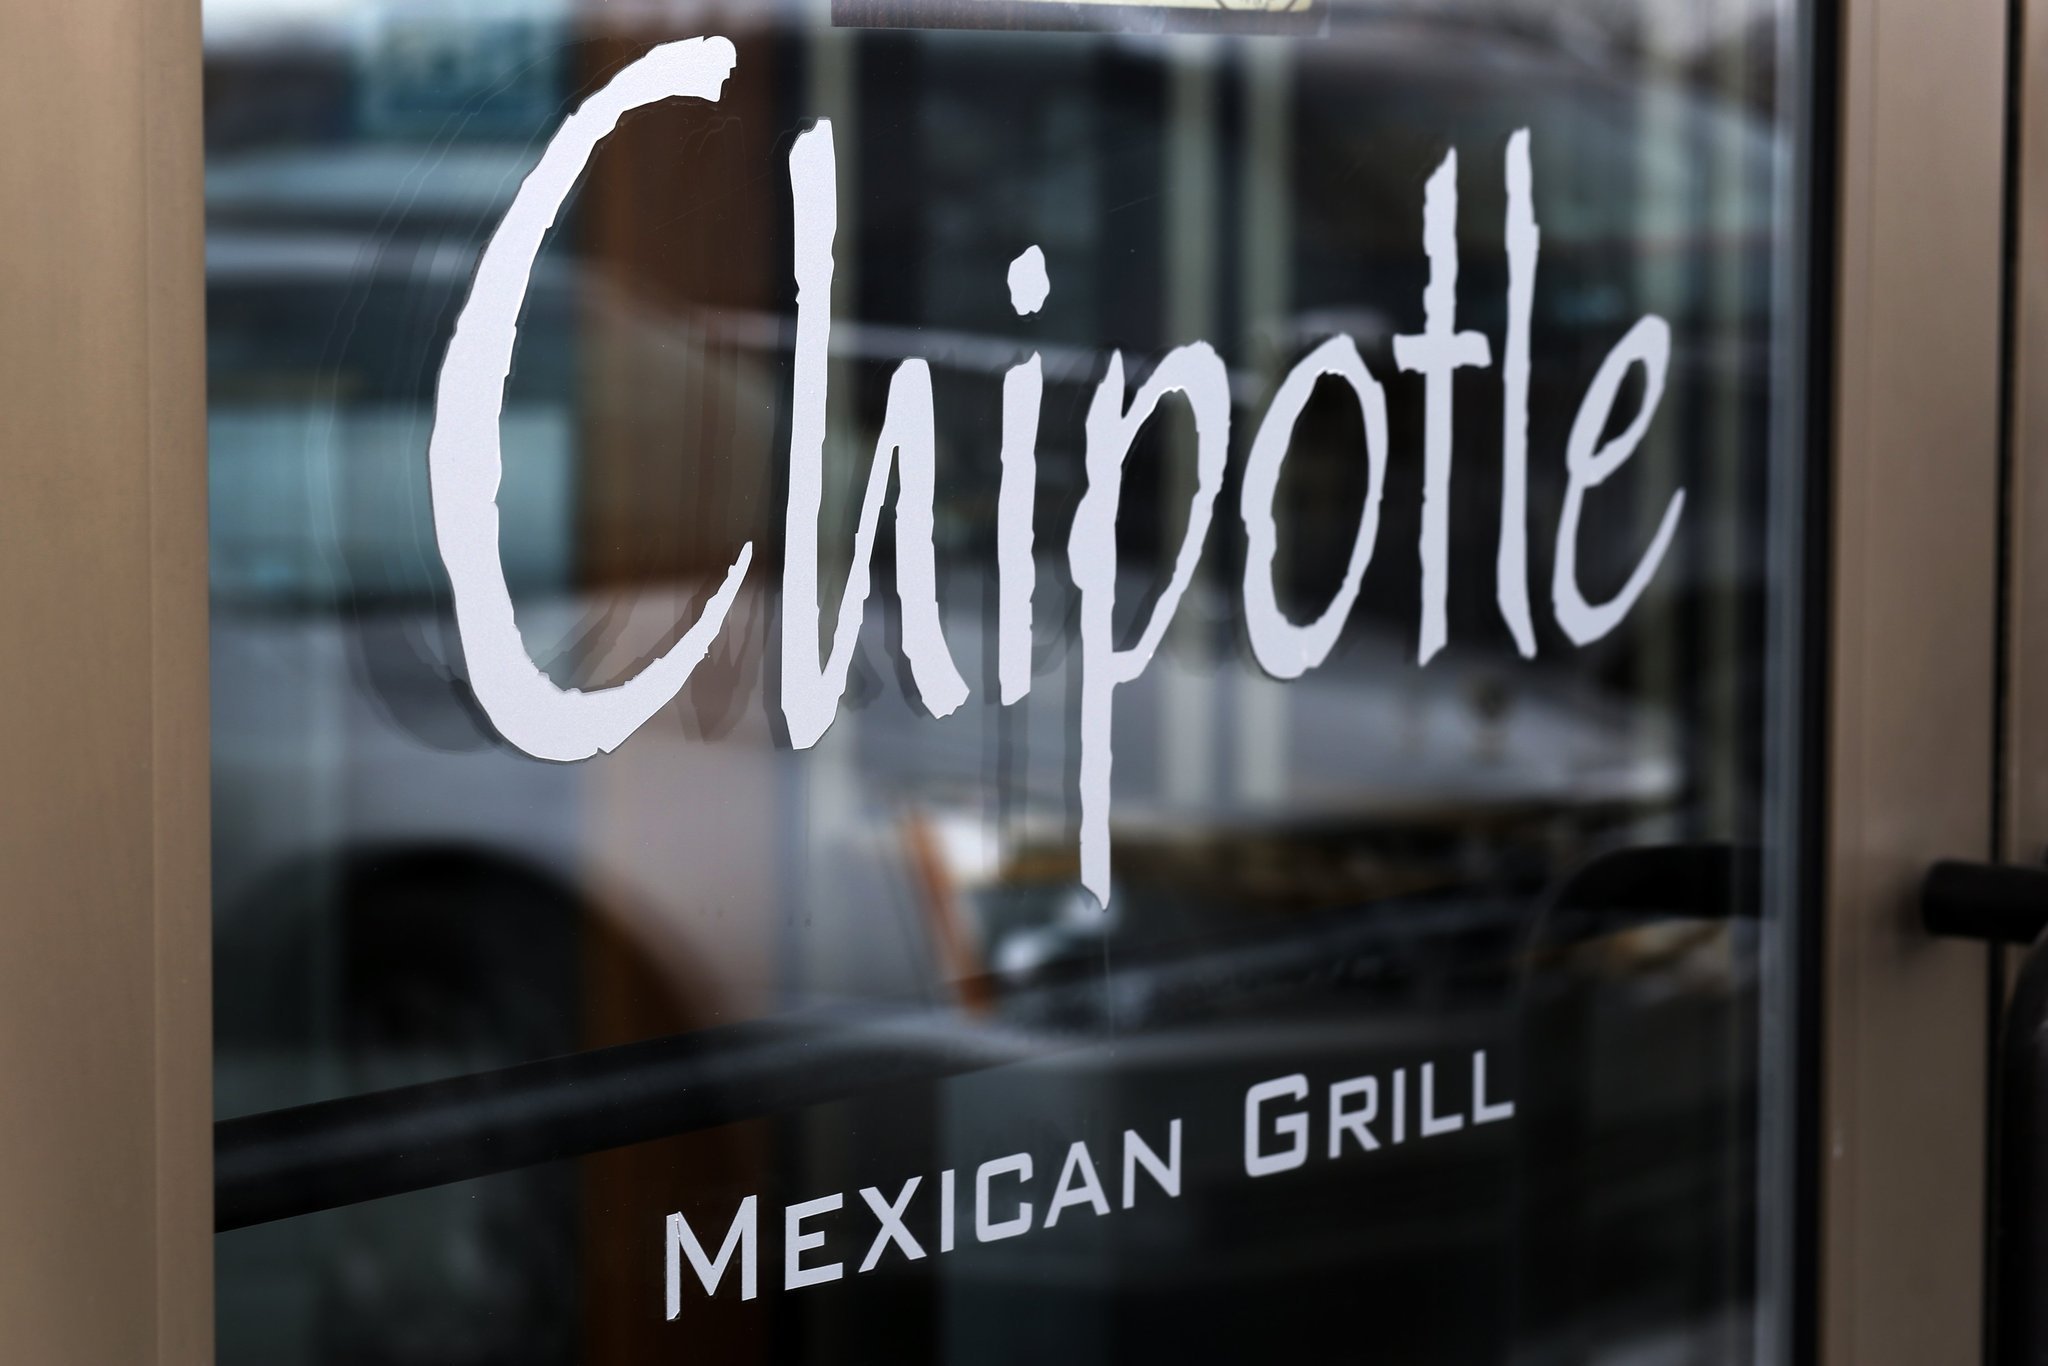 Chipotle launches delivery service in Chicago - Chicago Tribune